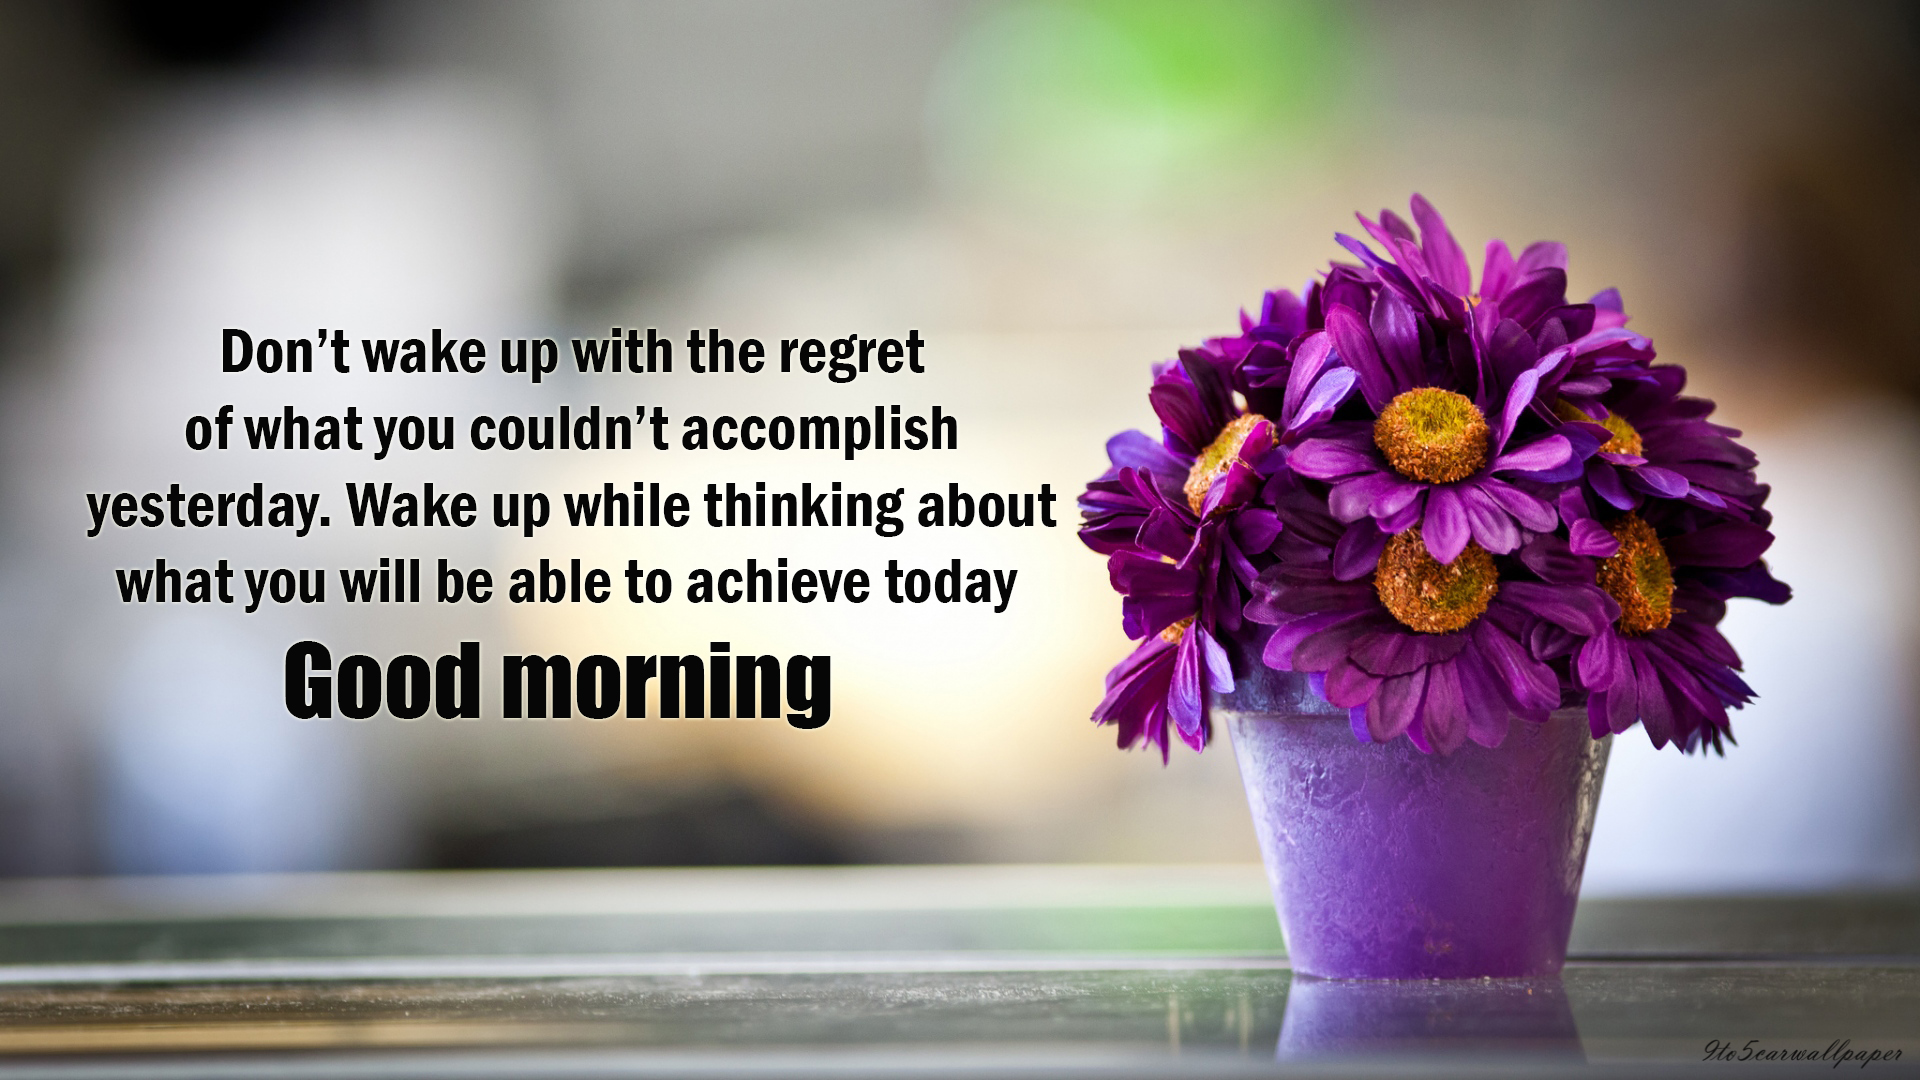 Inspirational Good Morning Wishes |